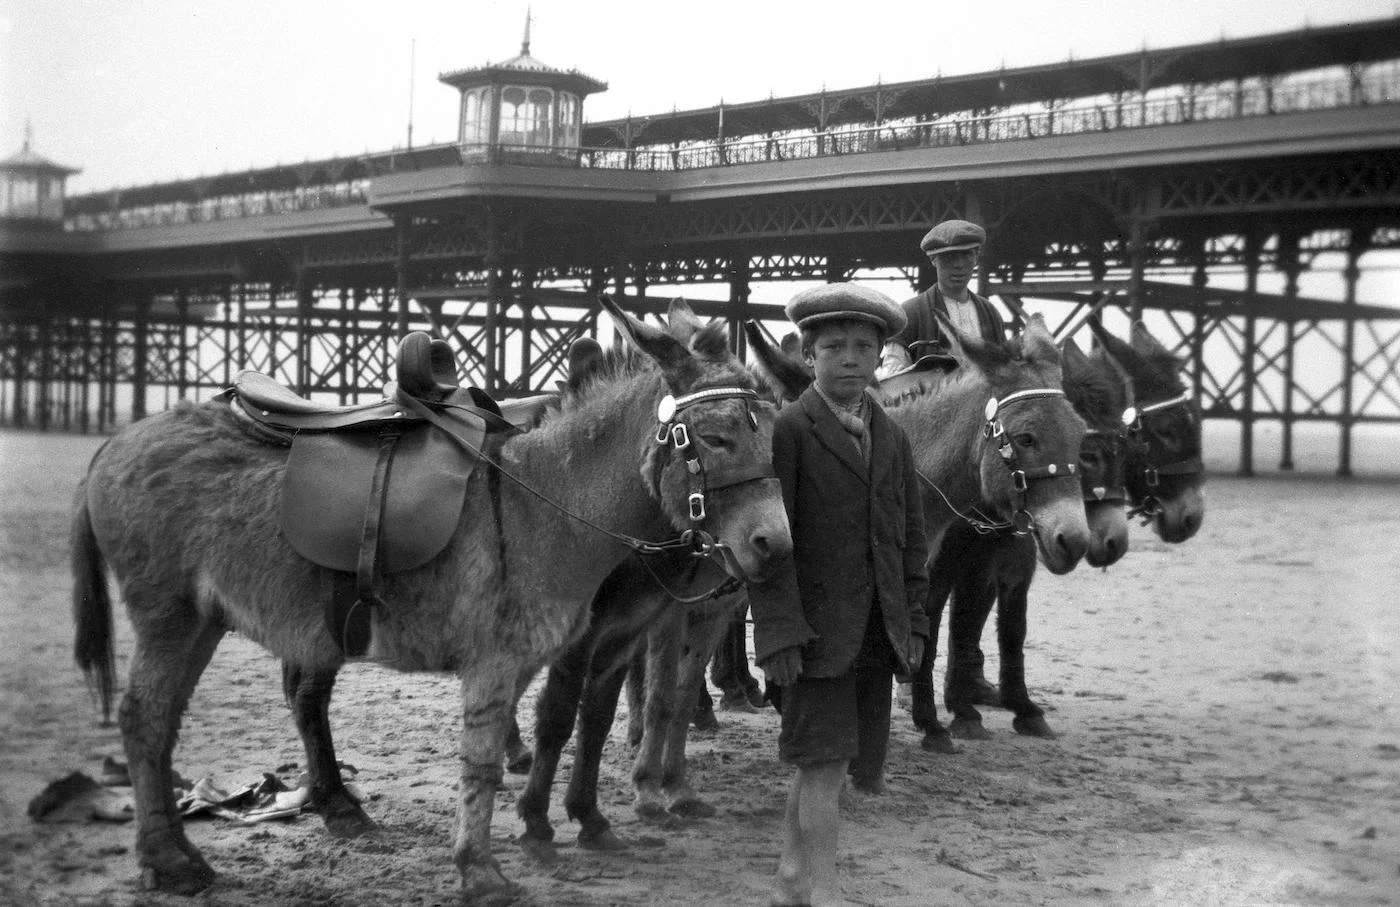 A young boy and young man, both wearing cloth caps, stand with their donkeys and wait for customers. England, UK, 1920s.